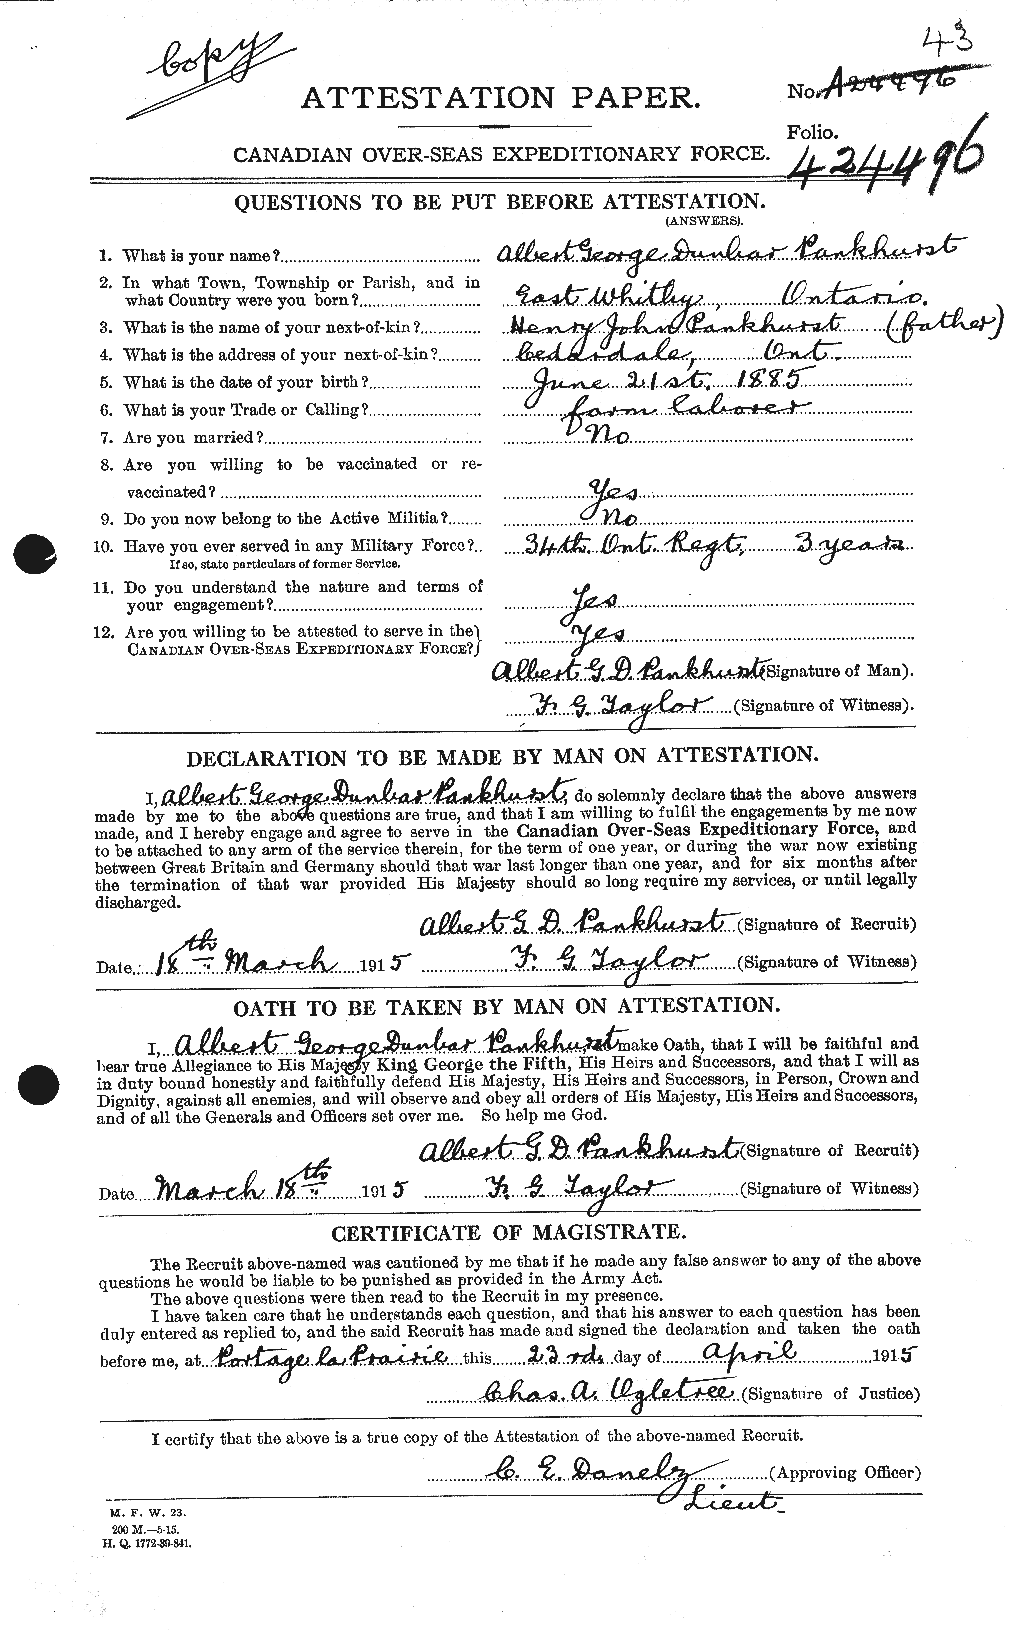 Personnel Records of the First World War - CEF 563370a